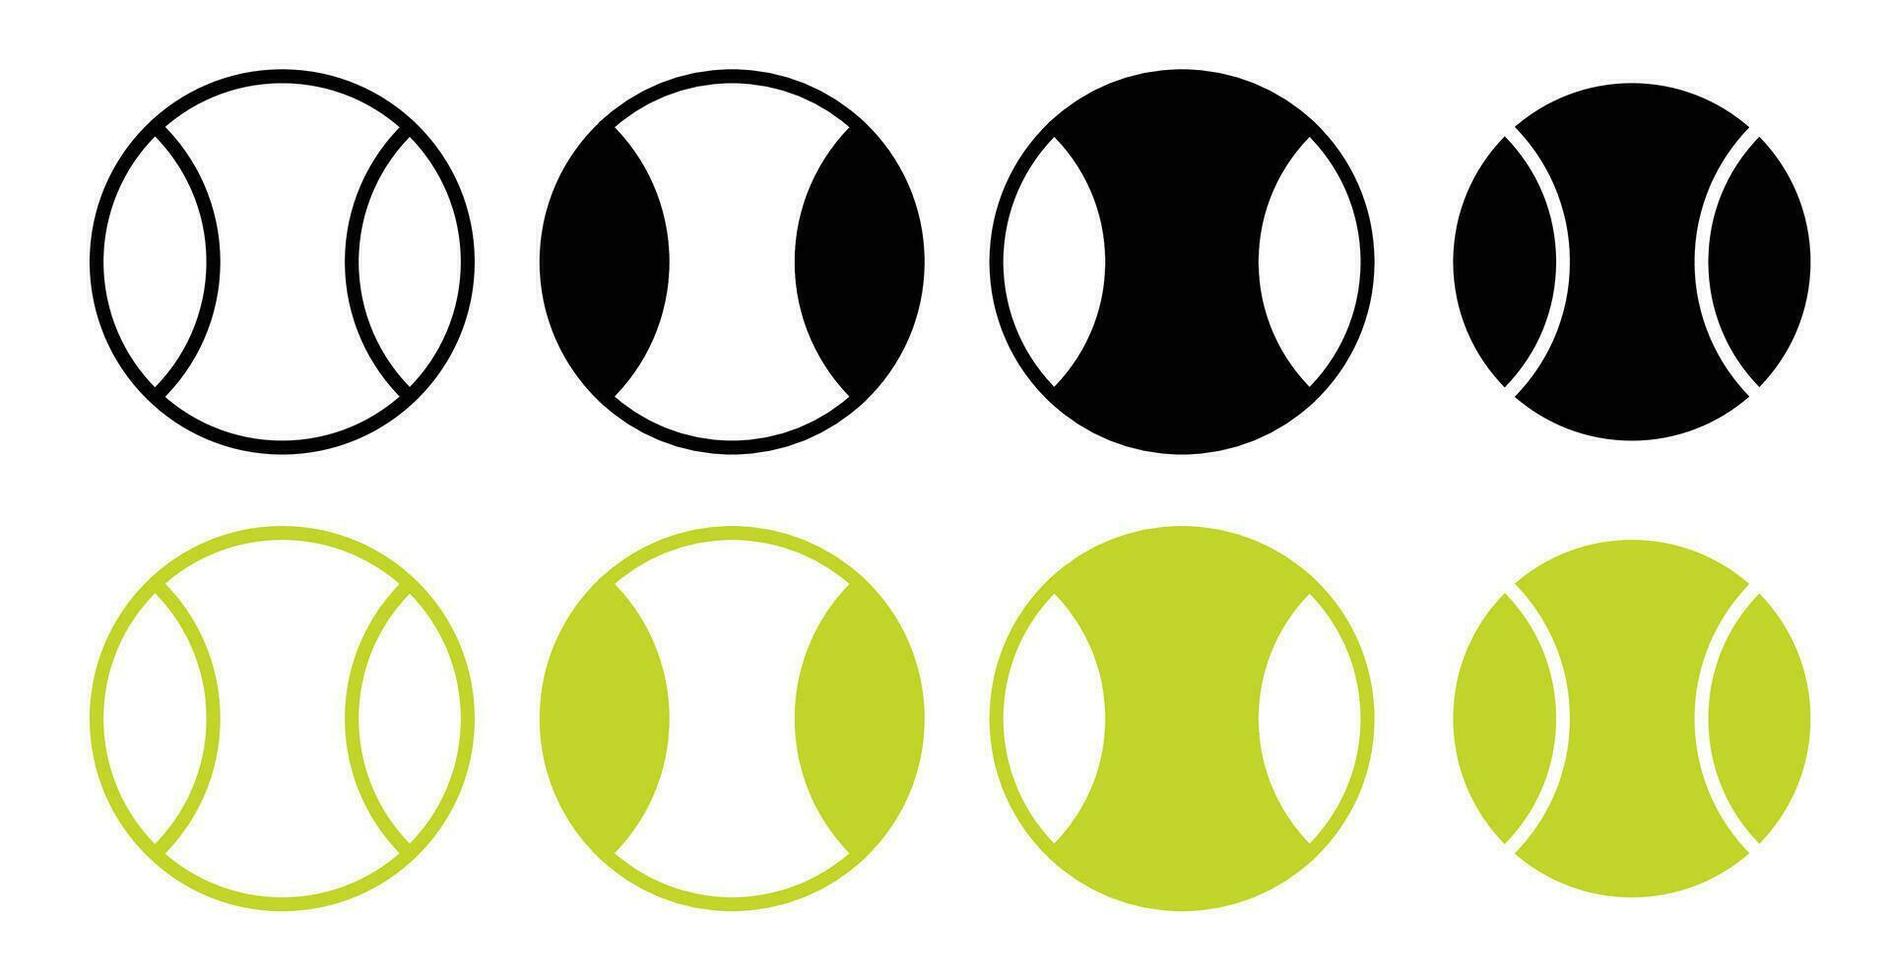 Tennis ball vector icon set in black and green color.